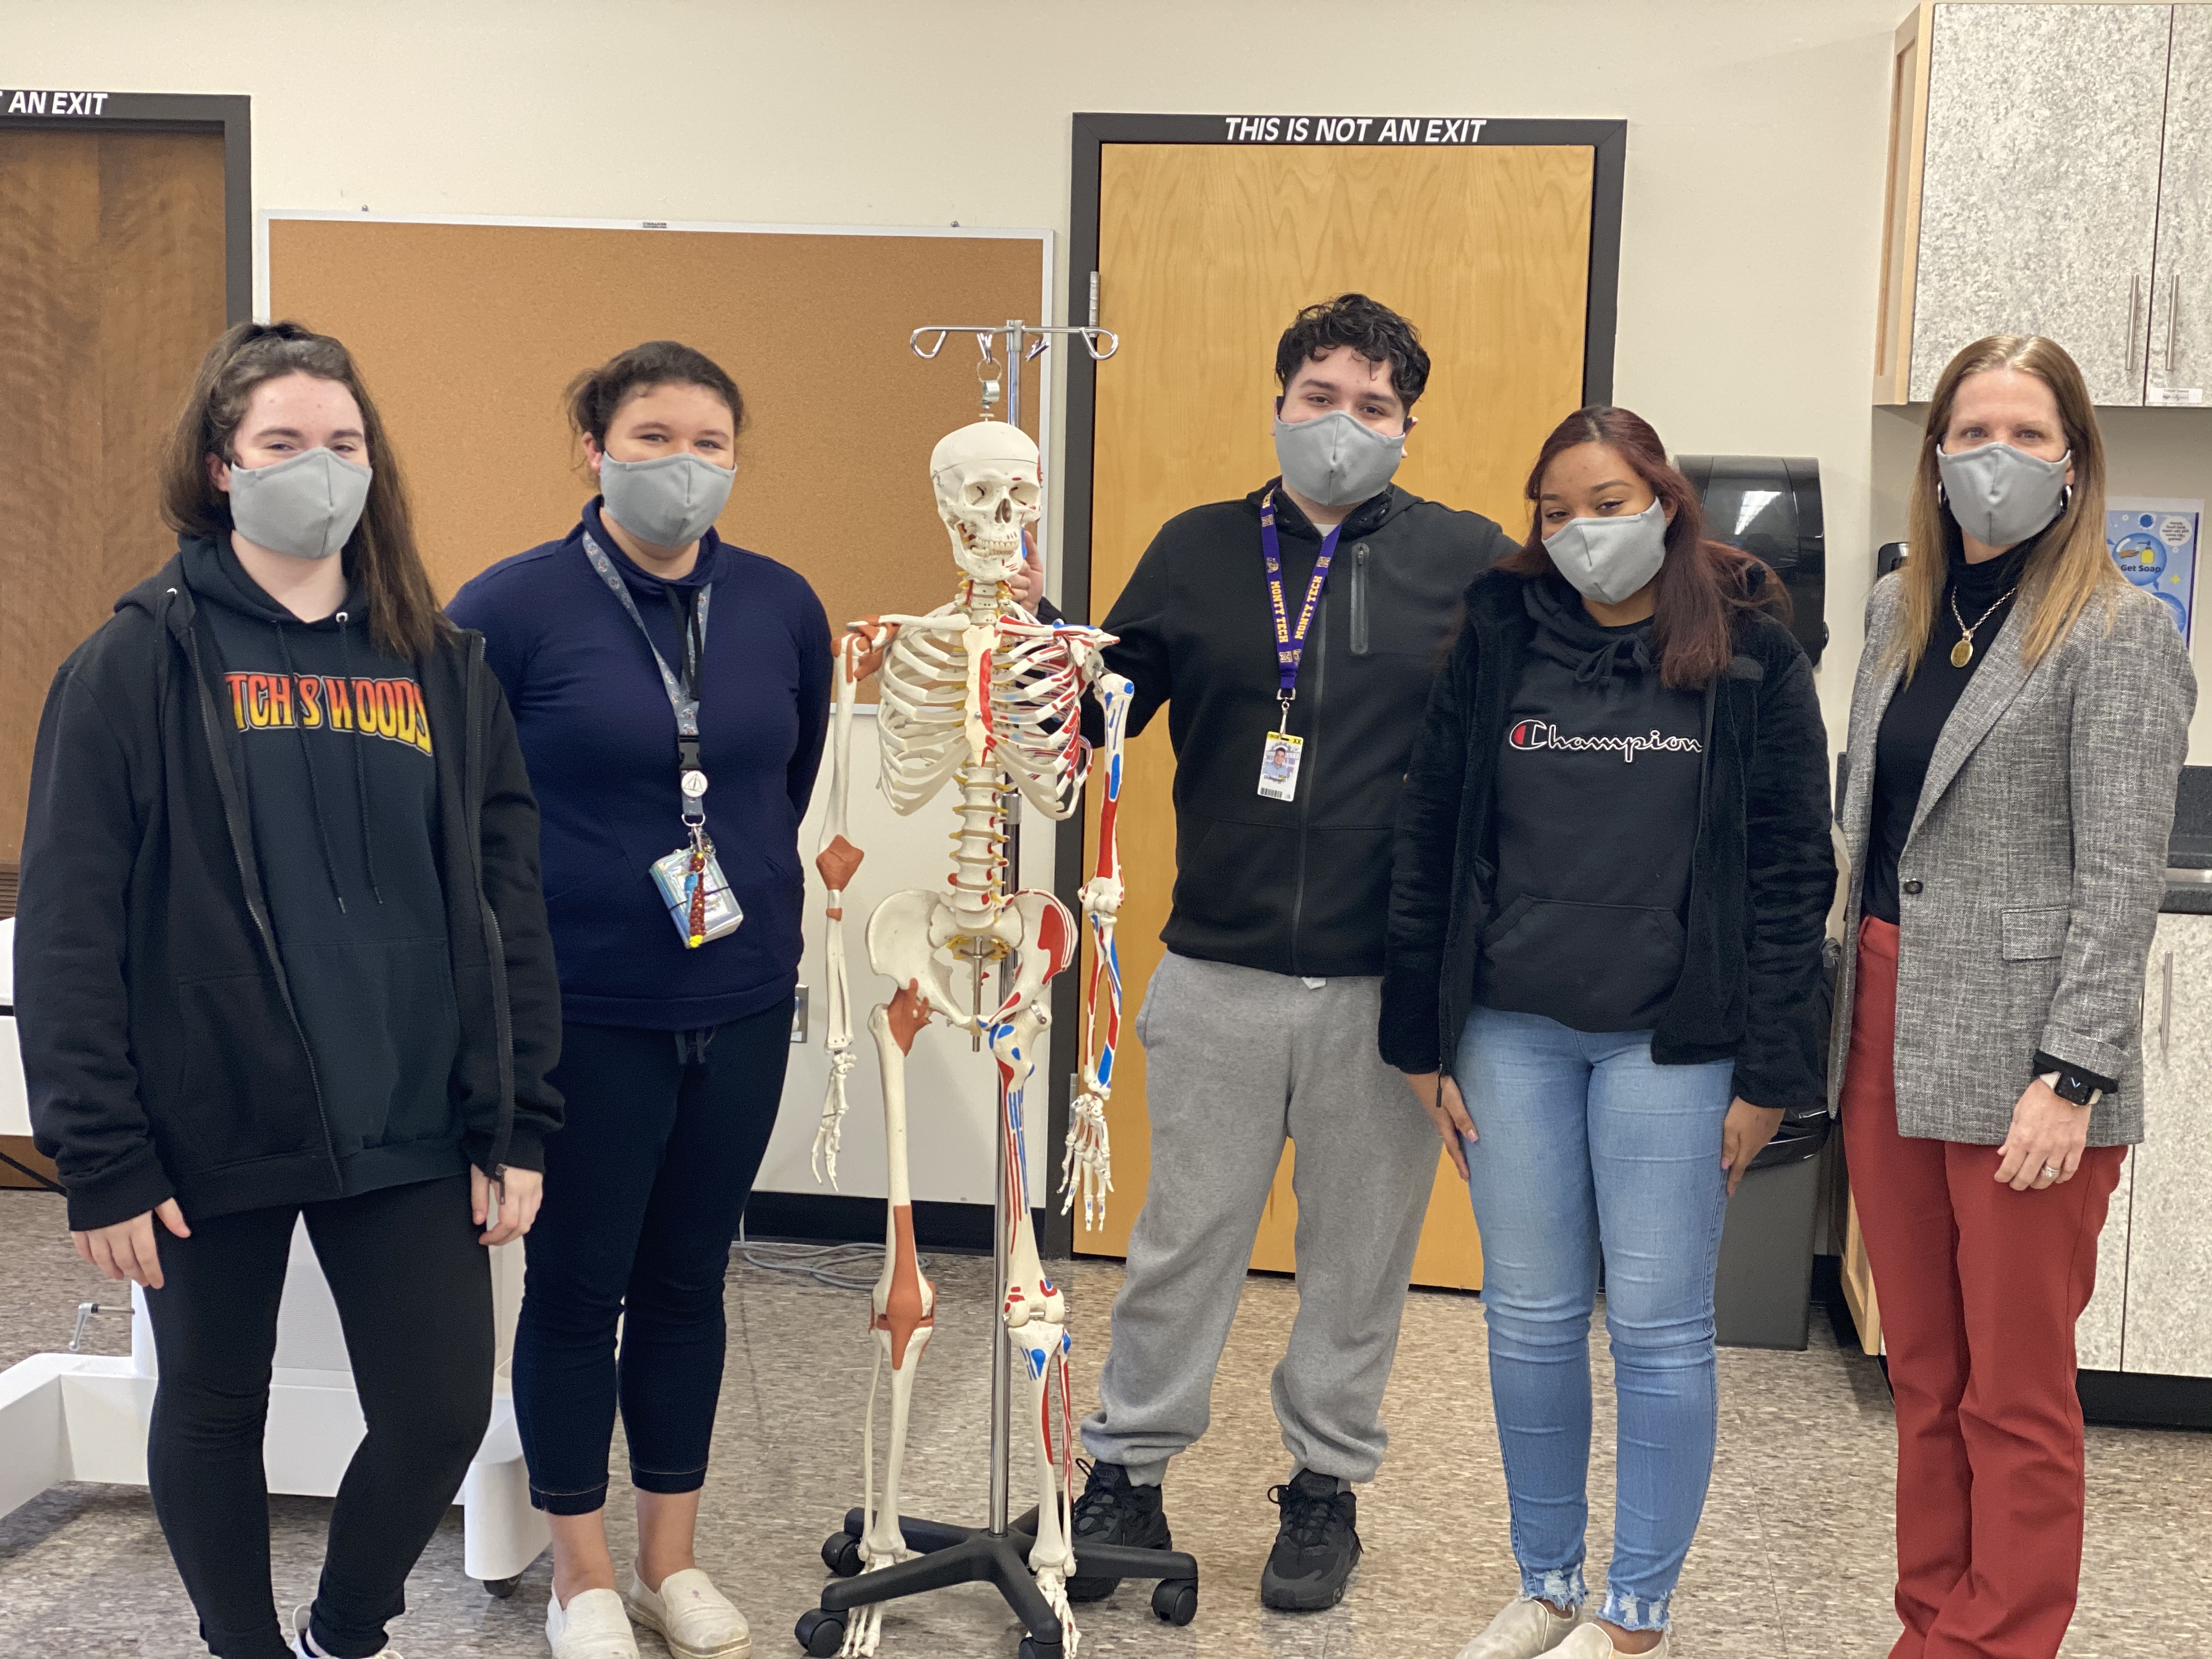 Monty Tech students wearing donated PPE